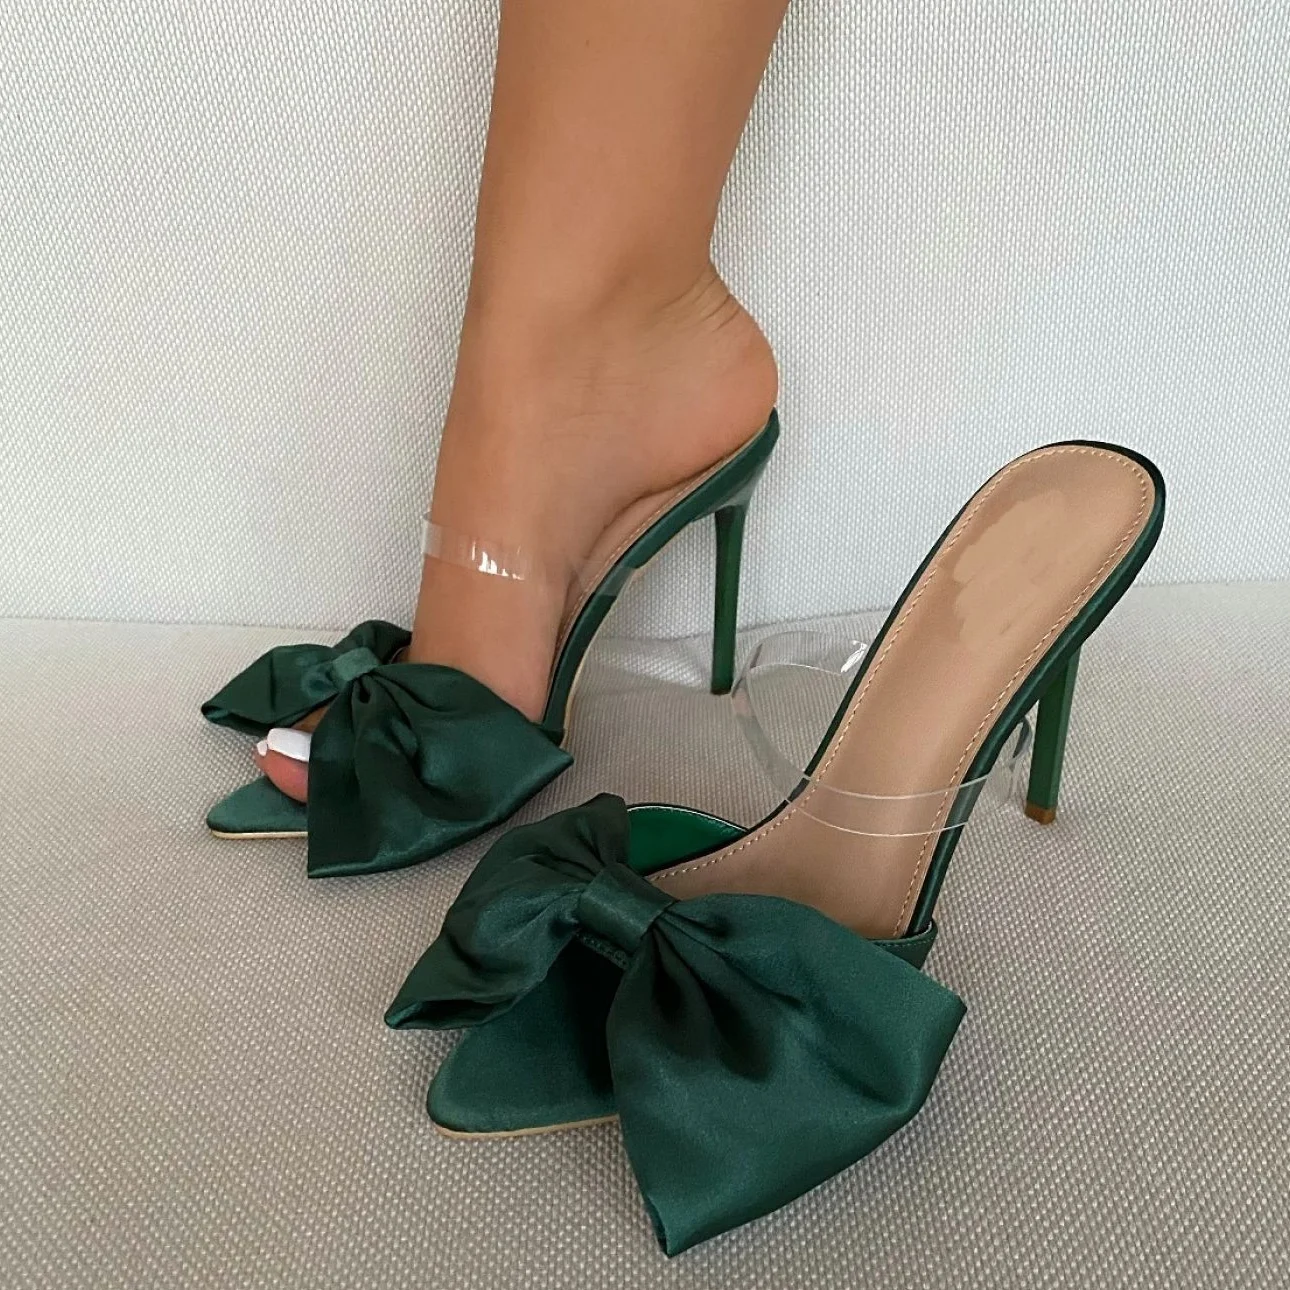 

Smooth Solid Big Bow-knot Band Thin High Heel Cheap Women Sandals Pointed Peep Toe Slip-on Summer Slides Shoes For Ladies, Black,green